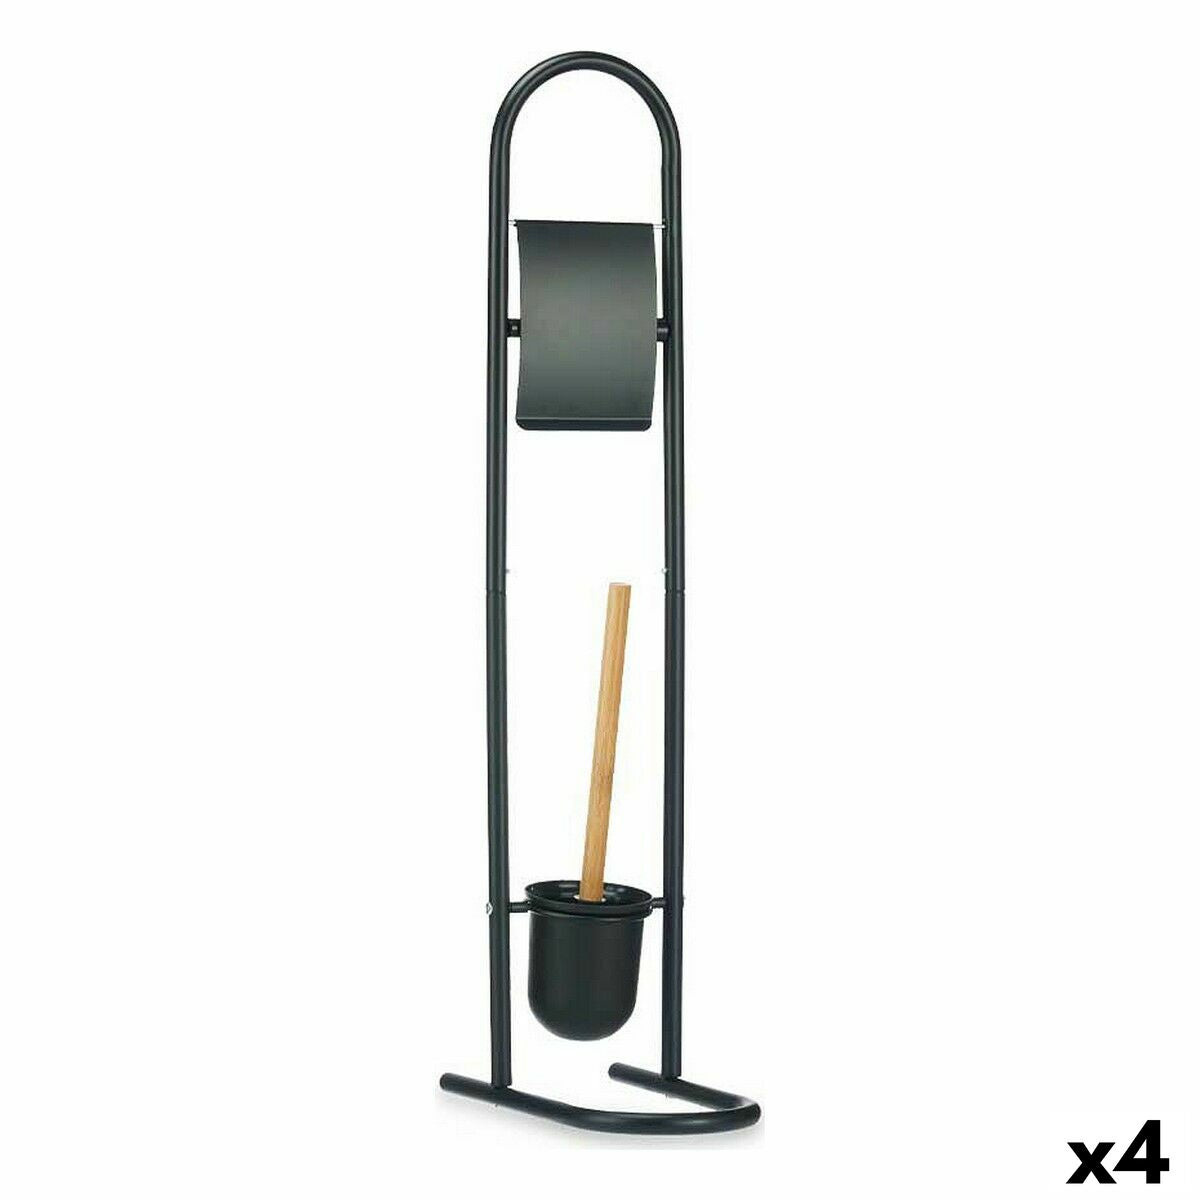 Toilet Paper Holder with Brush Stand 16 x 28,5 x 80,8 cm Black Metal Plastic Bamboo (4 Units)